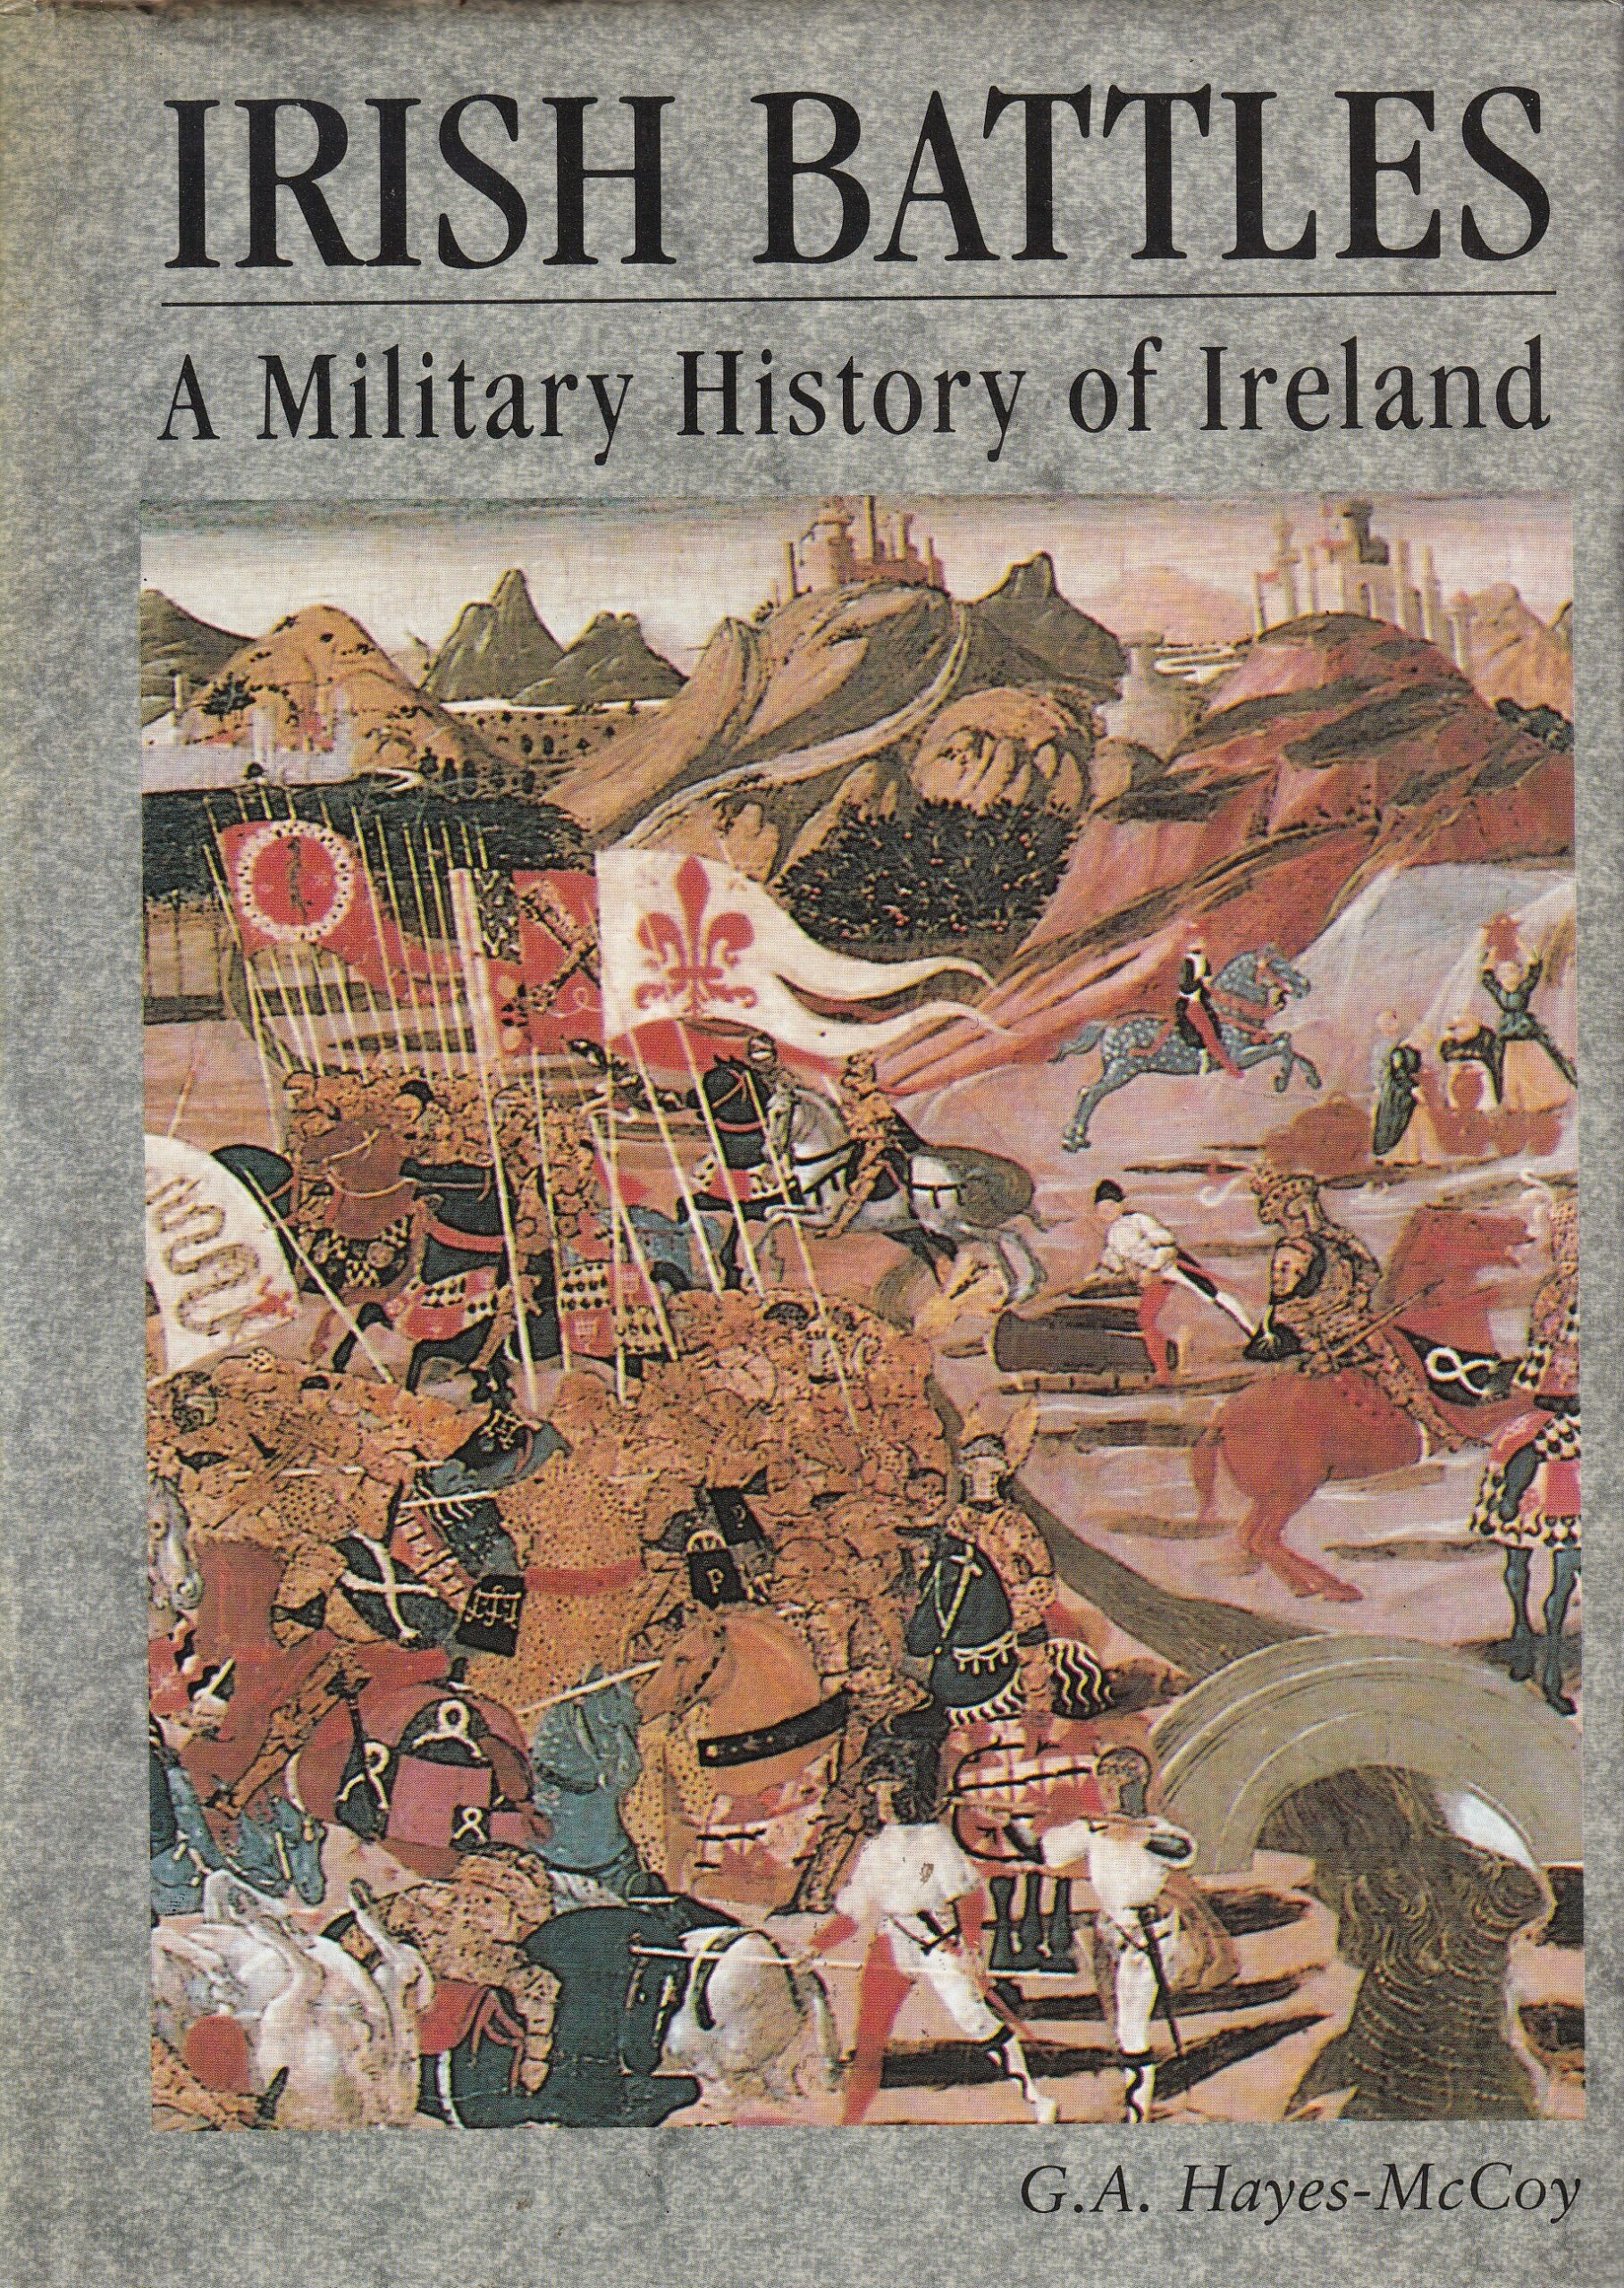 Irish Battles: A Military History of Ireland by G.A. Hayes-McCoy